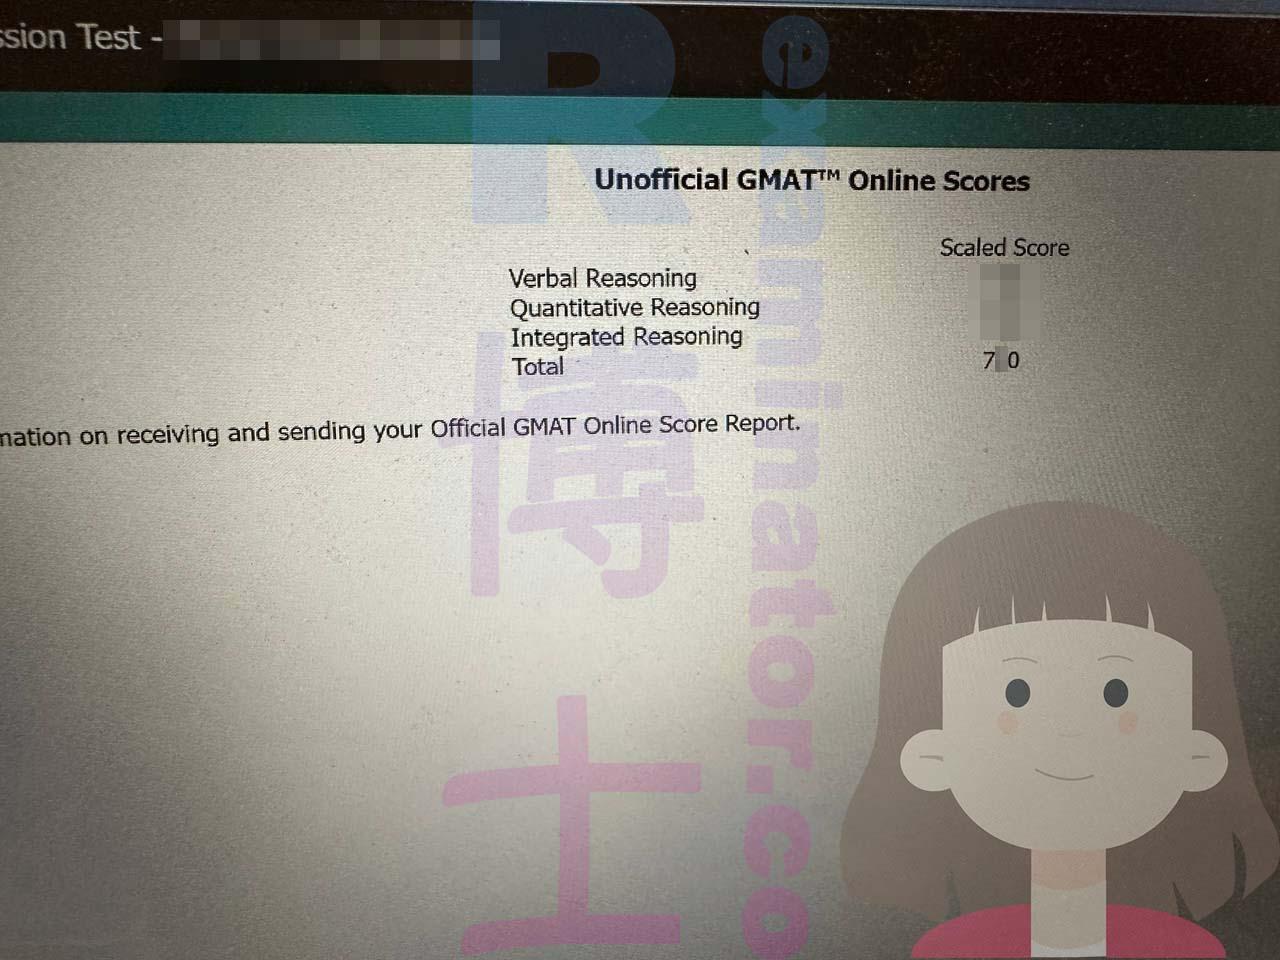 🇷🇺 Confident Serial Cheater Said No to Prep🤣😈: "I Don't Think I'll Have a Problem. I've Never Been Caught."  Russian Client Achieves Stellar GMAT Online Score with Our Proxy Testing Assistance! 🌟